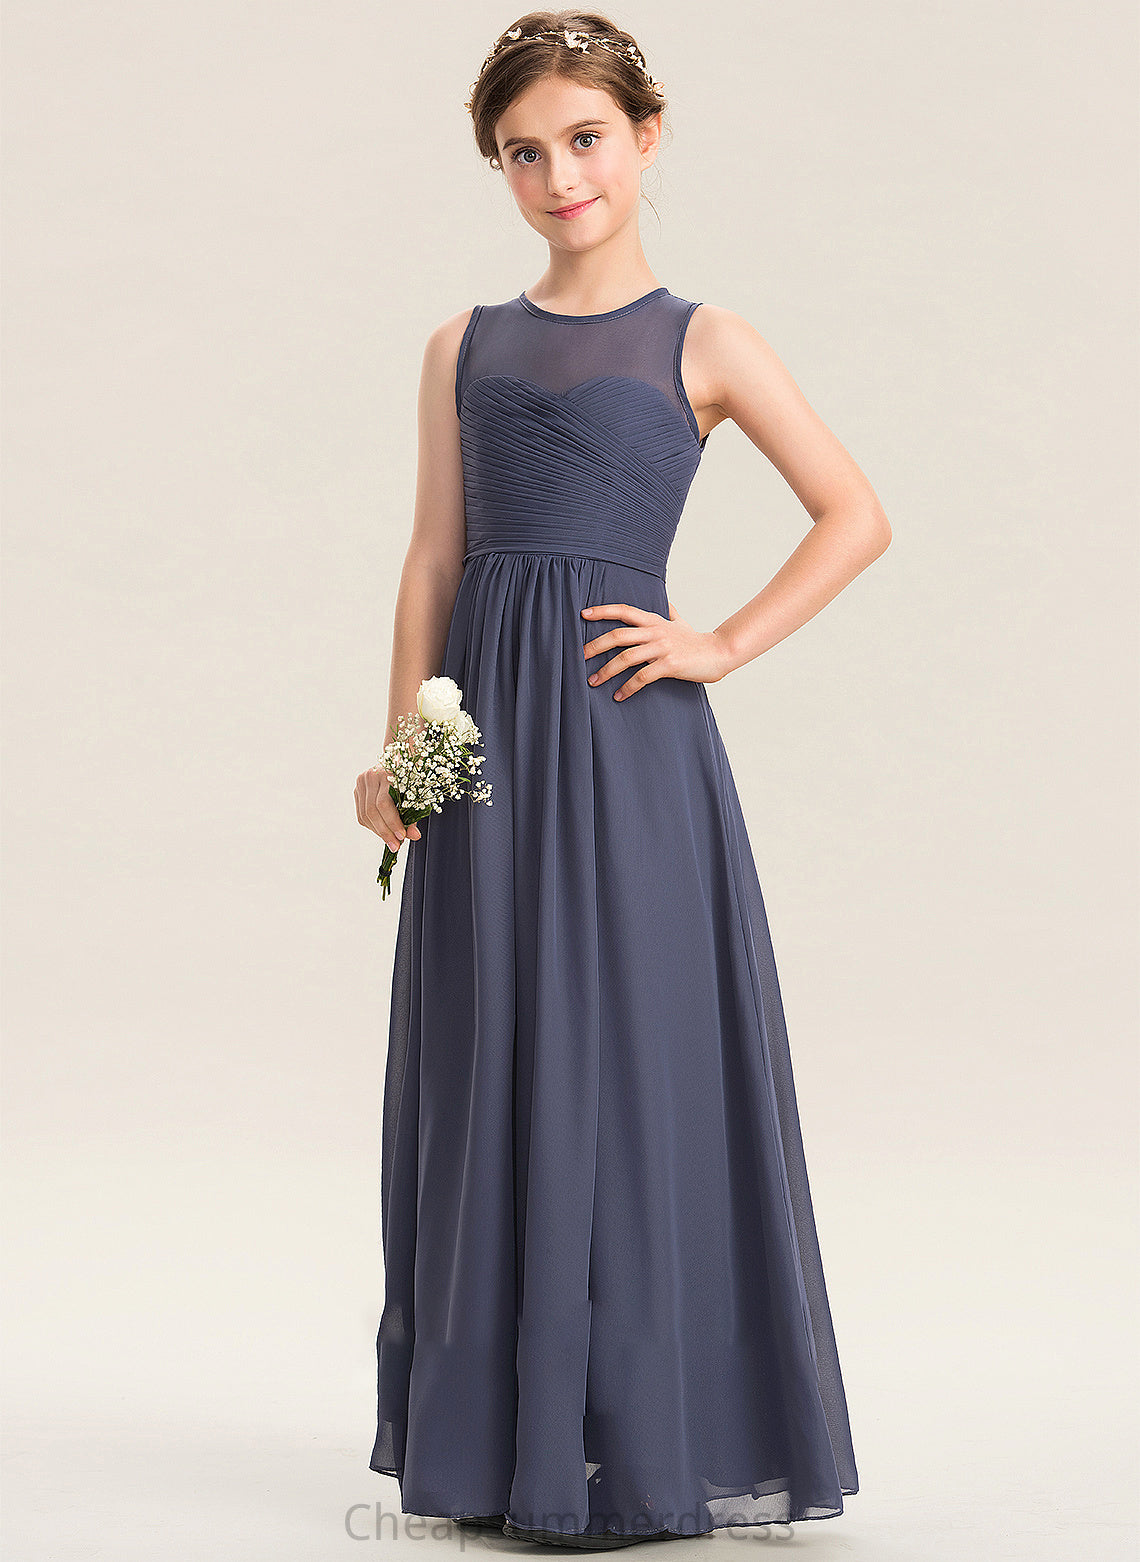 Scoop A-Line Junior Bridesmaid Dresses Floor-Length Neck Chiffon Ruffle Rory With